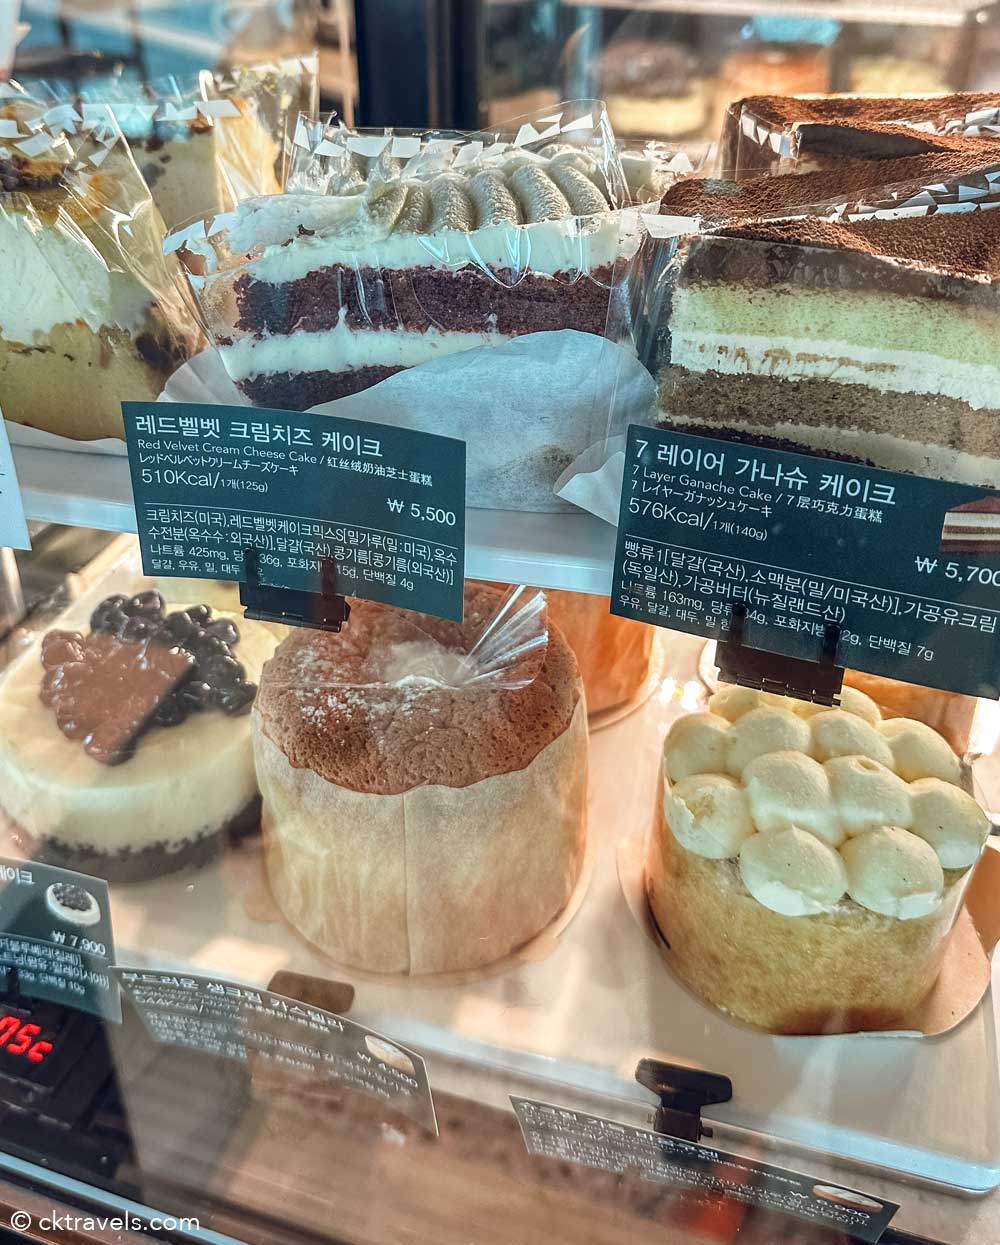 cakes at World’s Tallest Starbucks at Busan X The Sky, South Korea